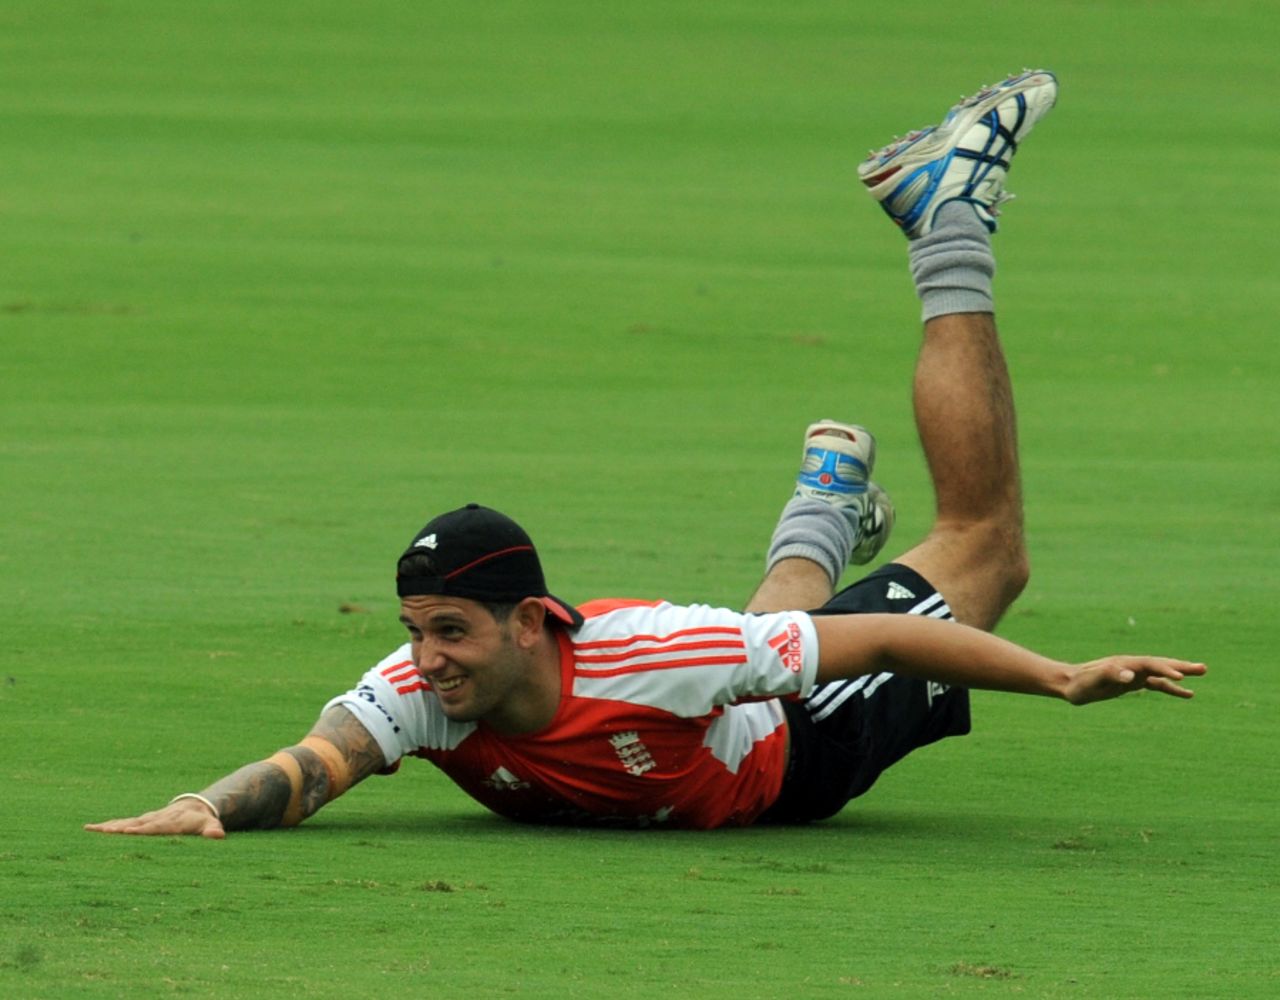 Jade Dernbach takes a tumble trying to field a ball, Hyderabad, October 7 2011